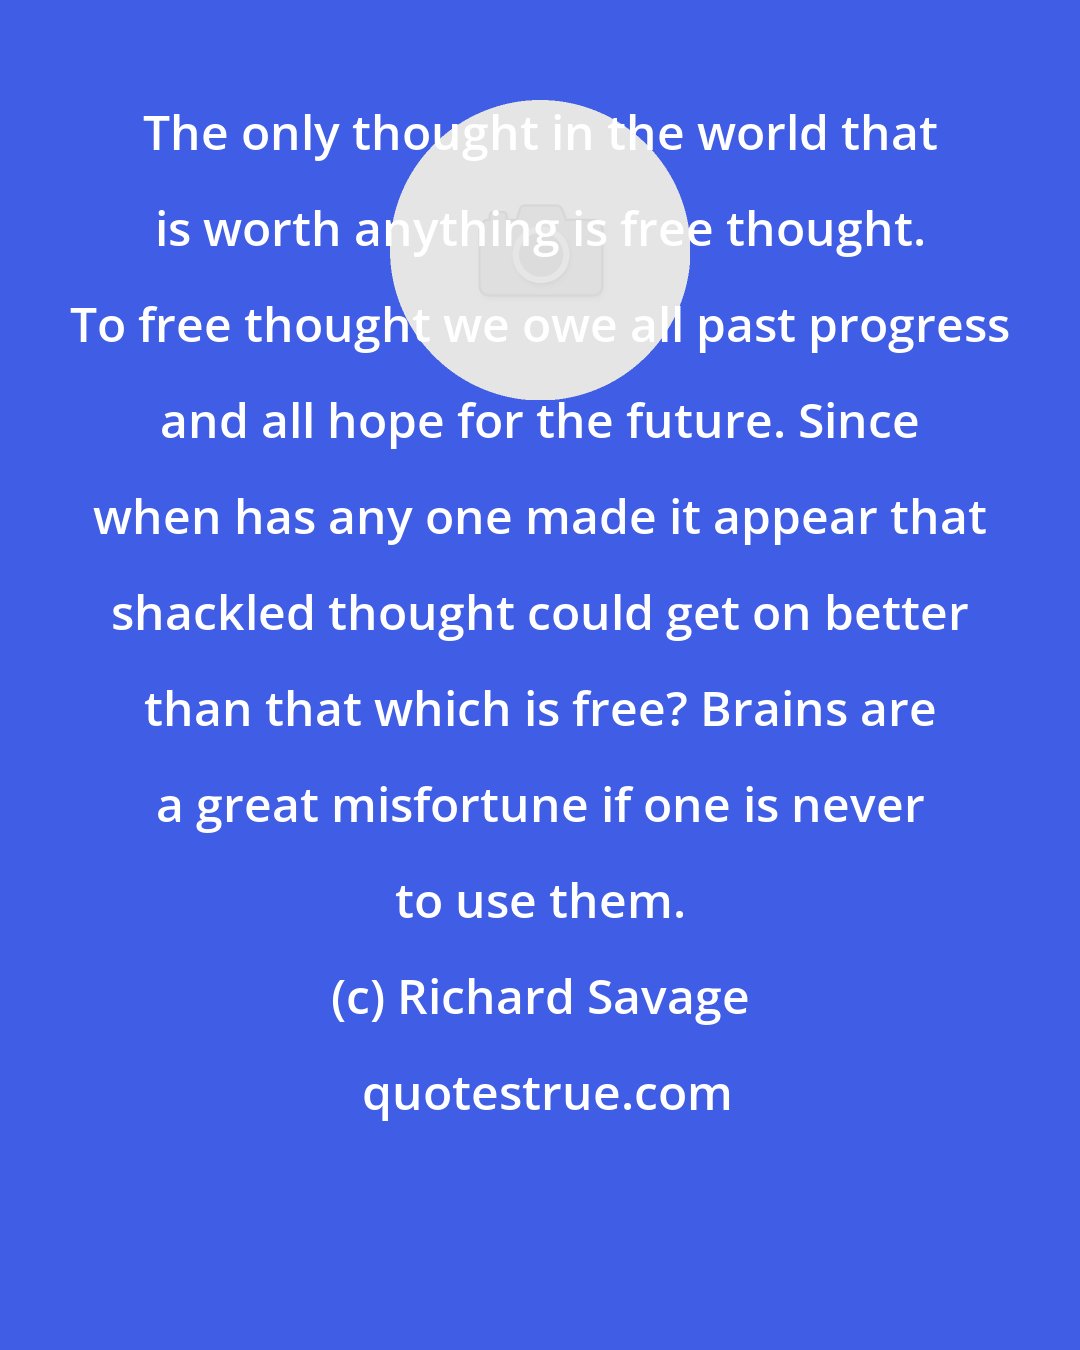 Richard Savage: The only thought in the world that is worth anything is free thought. To free thought we owe all past progress and all hope for the future. Since when has any one made it appear that shackled thought could get on better than that which is free? Brains are a great misfortune if one is never to use them.